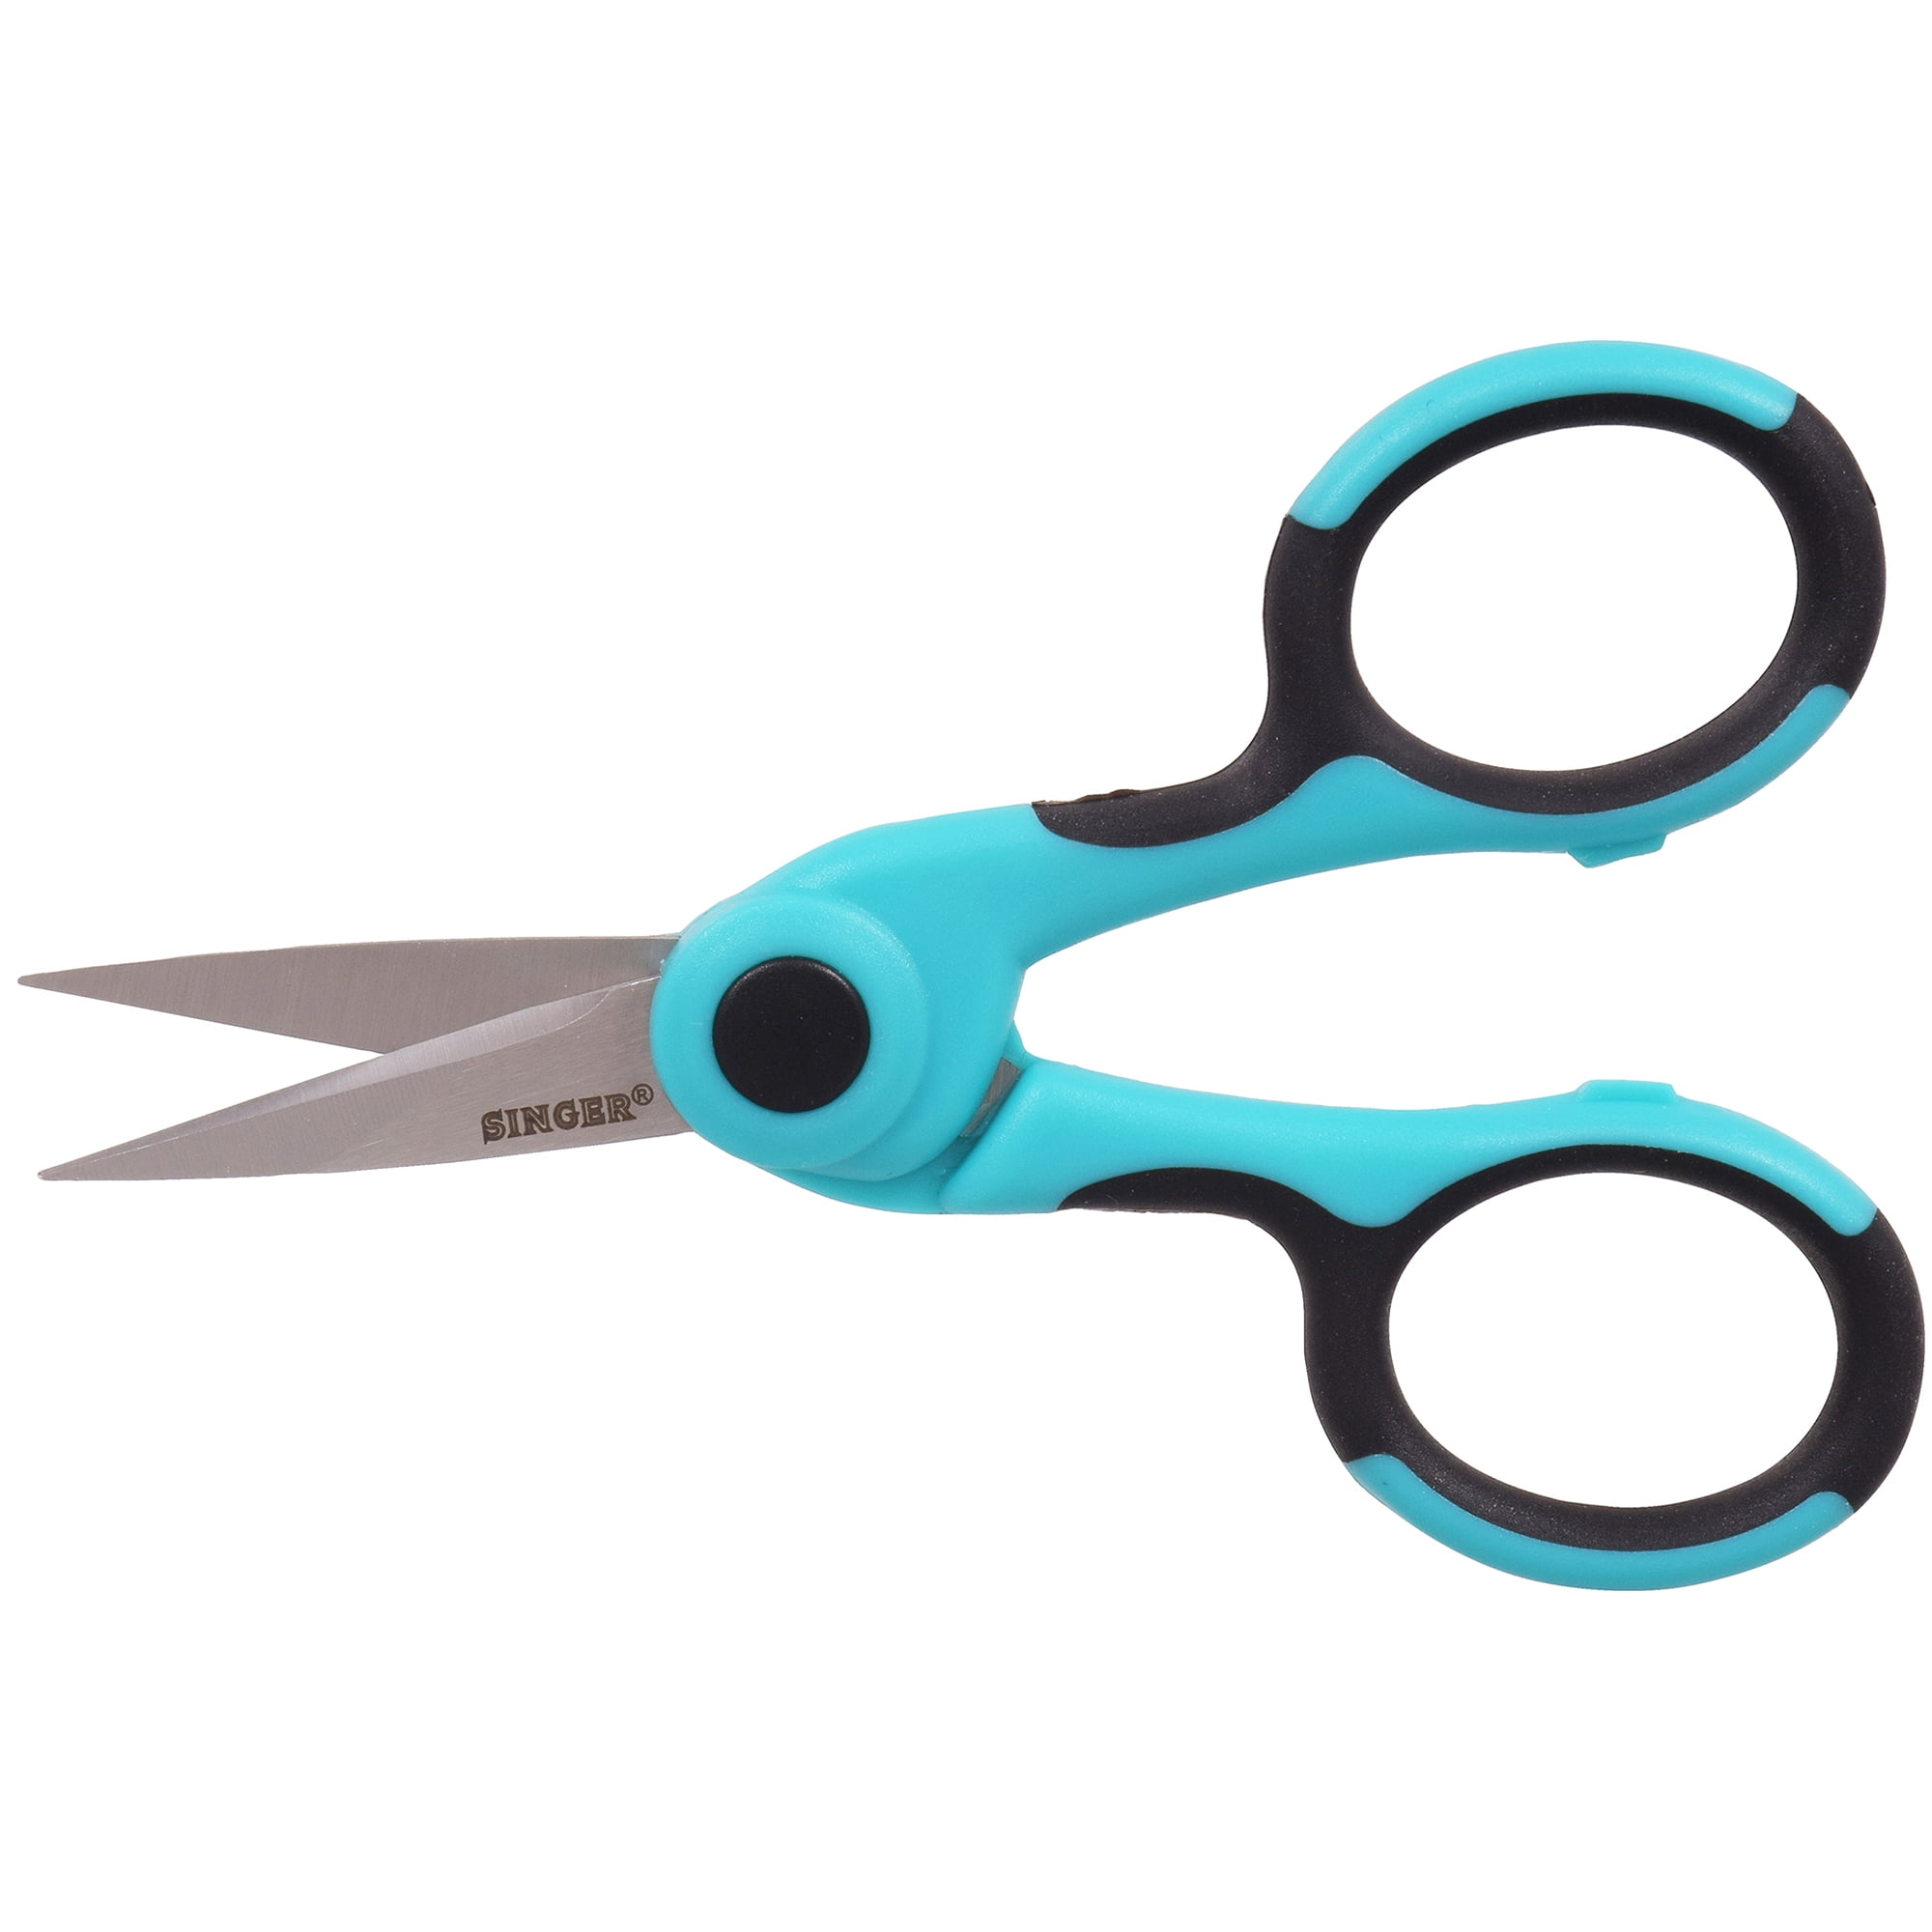 Singer 00562 9-1/2-Inch ProSeries, 3-Pack Heavy Duty Bent Sewing Scissors Teal